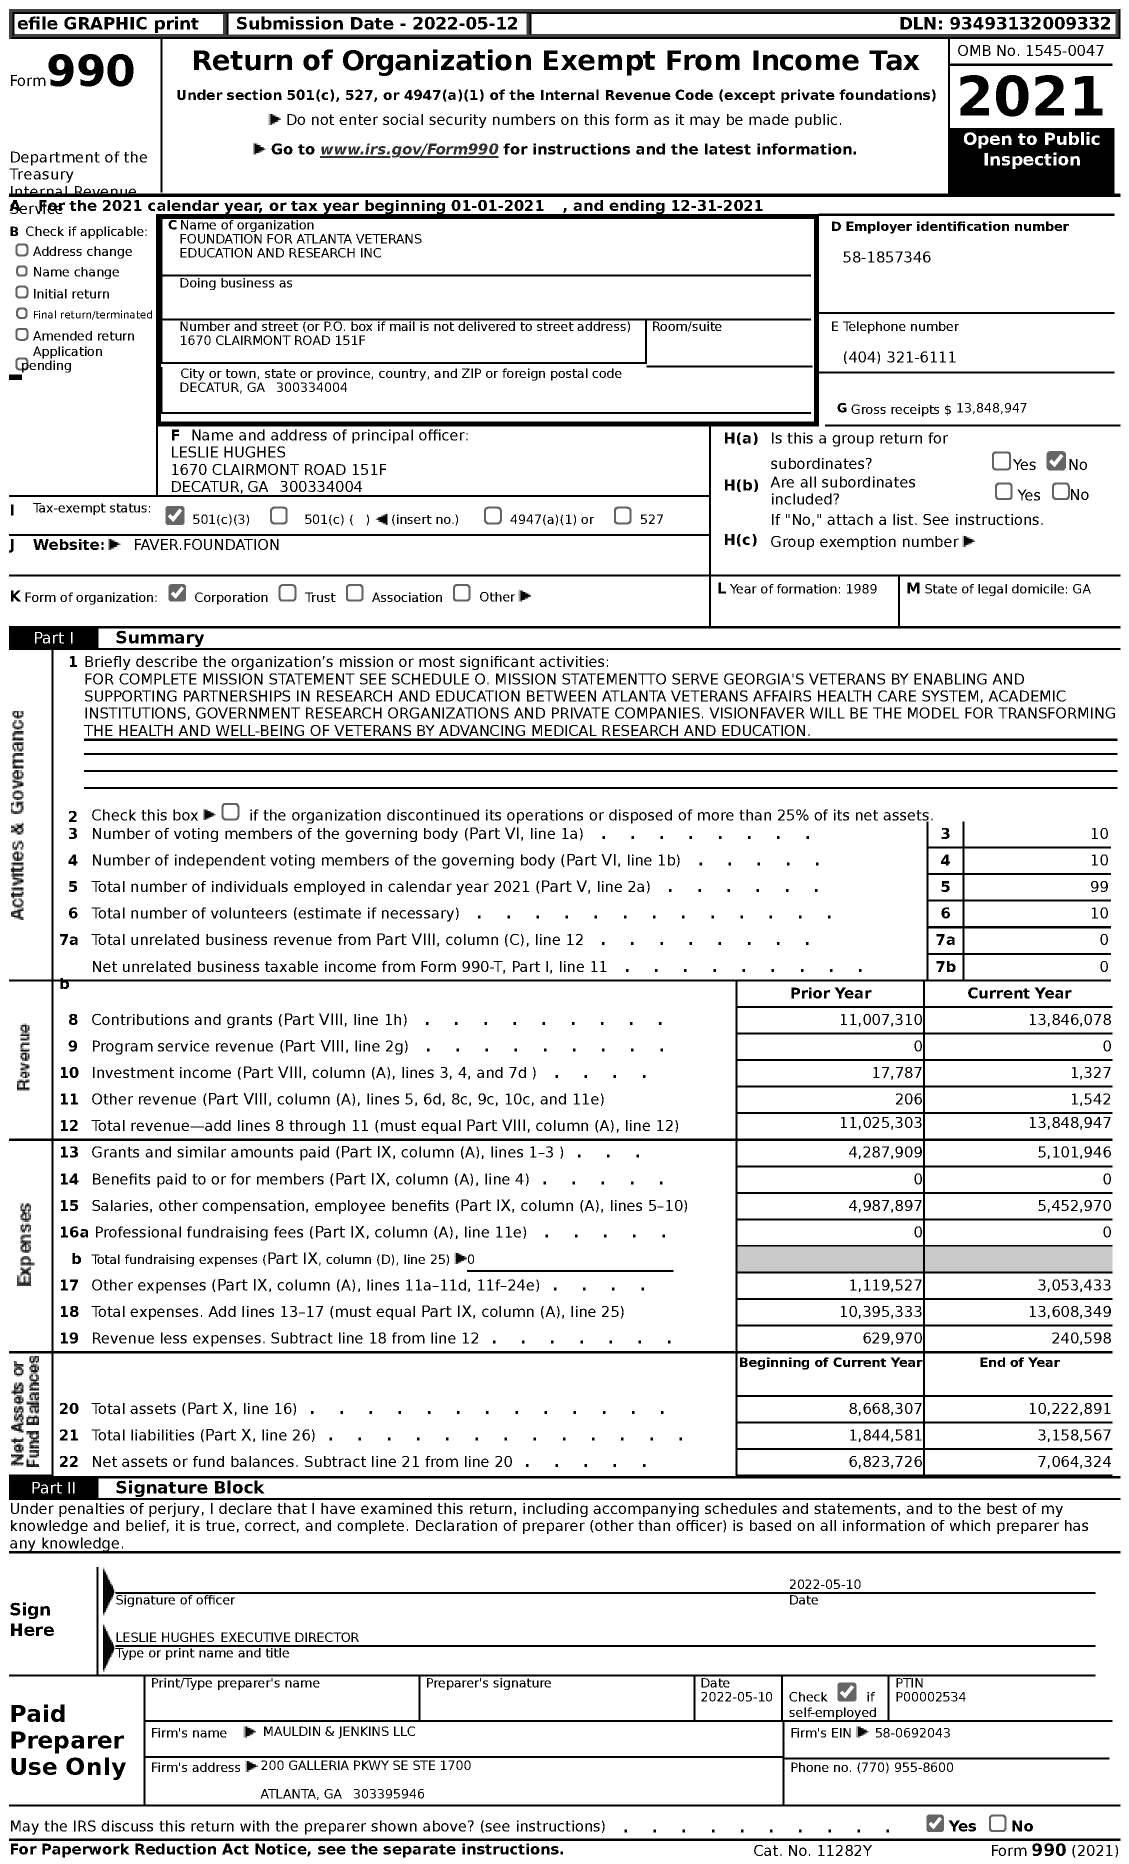 Image of first page of 2021 Form 990 for Foundation for Atlanta Veterans Education and Research (AREF)